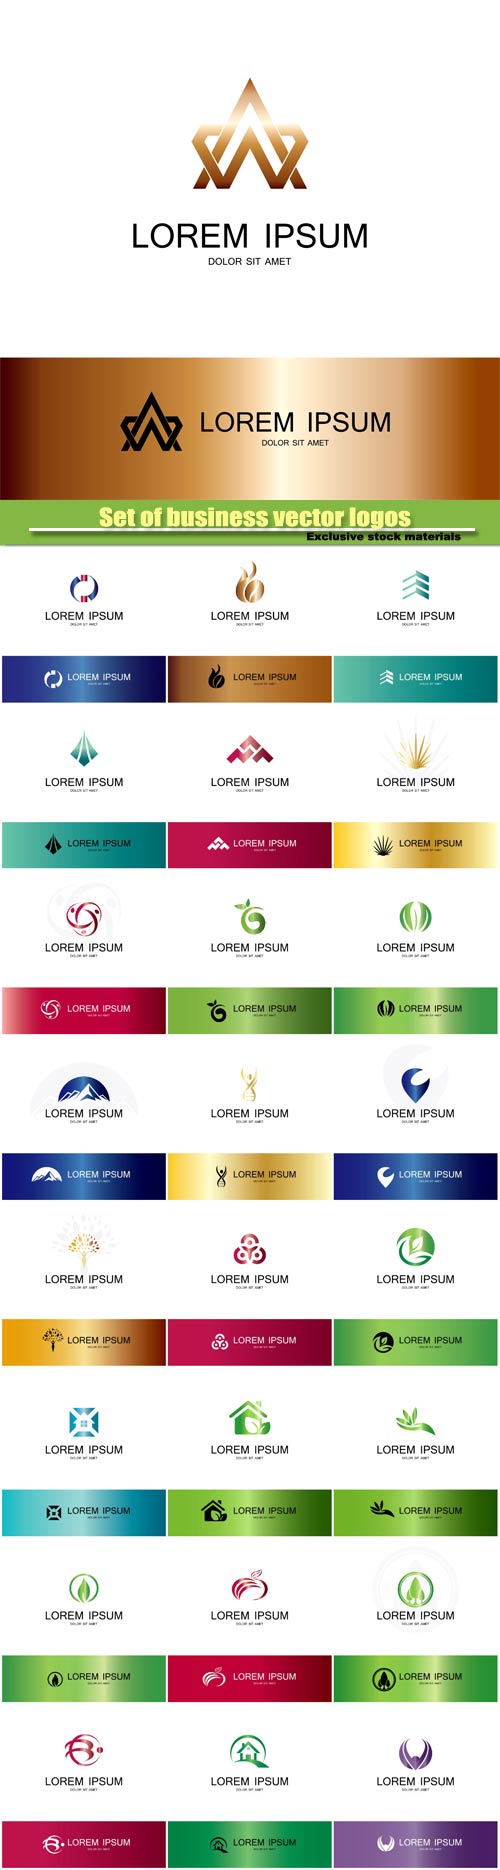 Set of different business vector logos